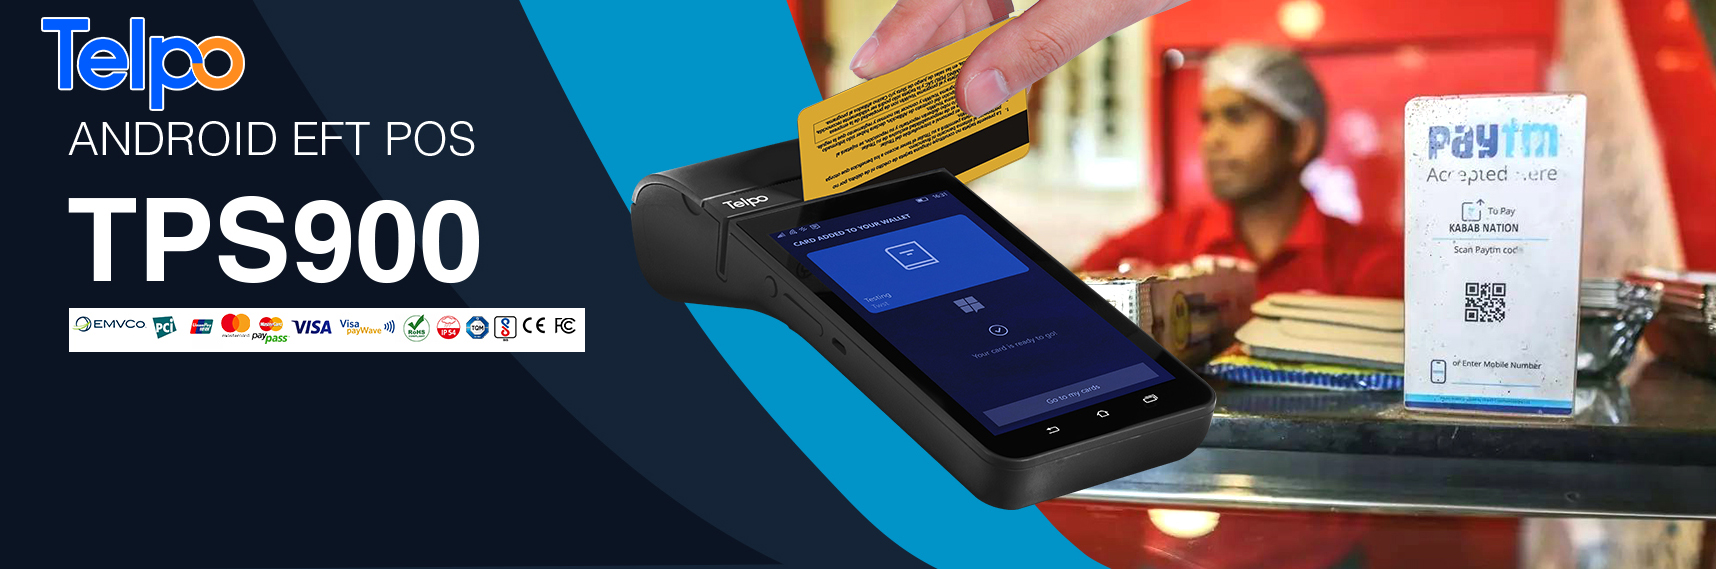 Telpo Smart POS Helps You Withdraw Indian Cash